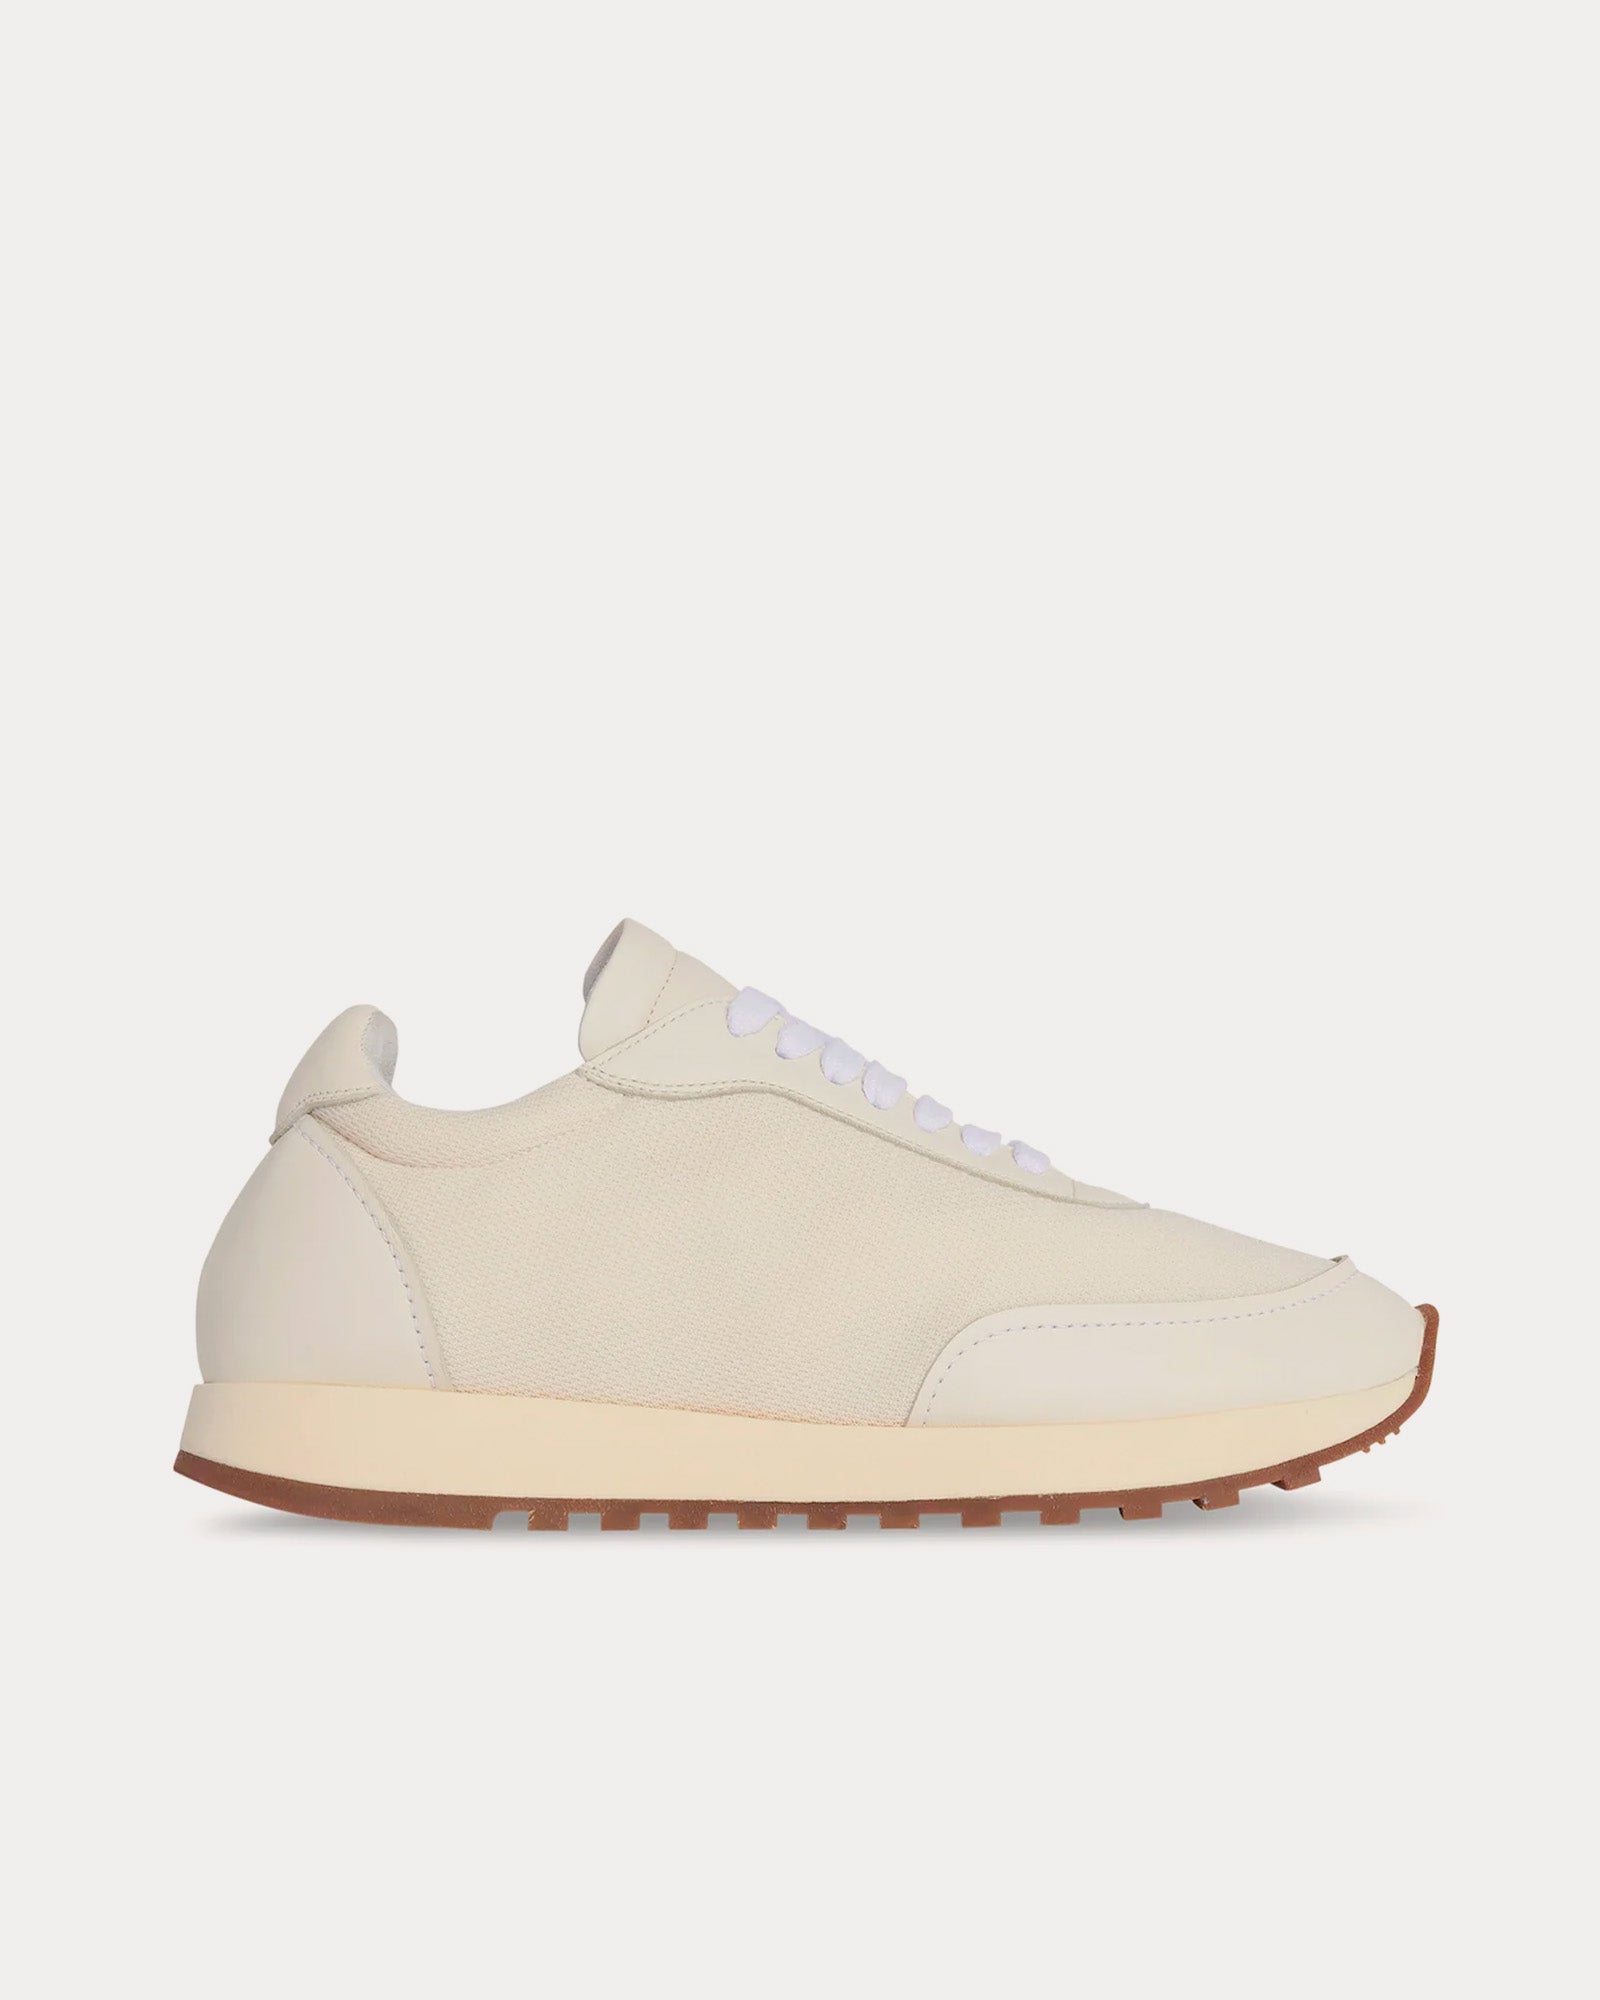 The Row - Owen Runner Leather & Nylon Milk / White / Brown Low Top Sneakers